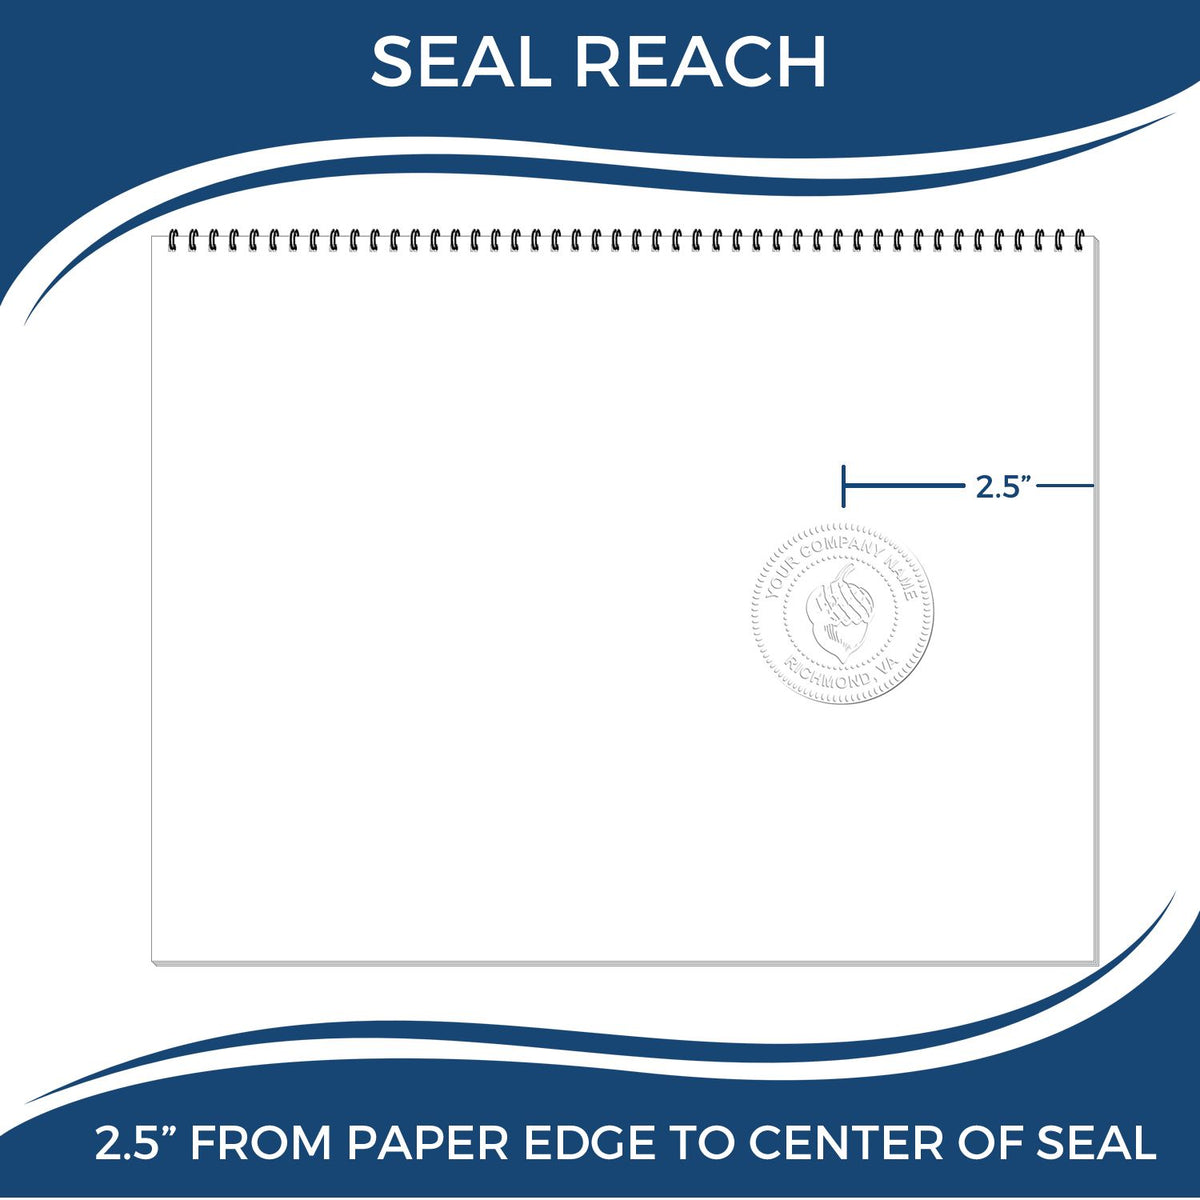 An infographic showing the seal reach which is represented by a ruler and a miniature seal image of the Long Reach New Hampshire PE Seal